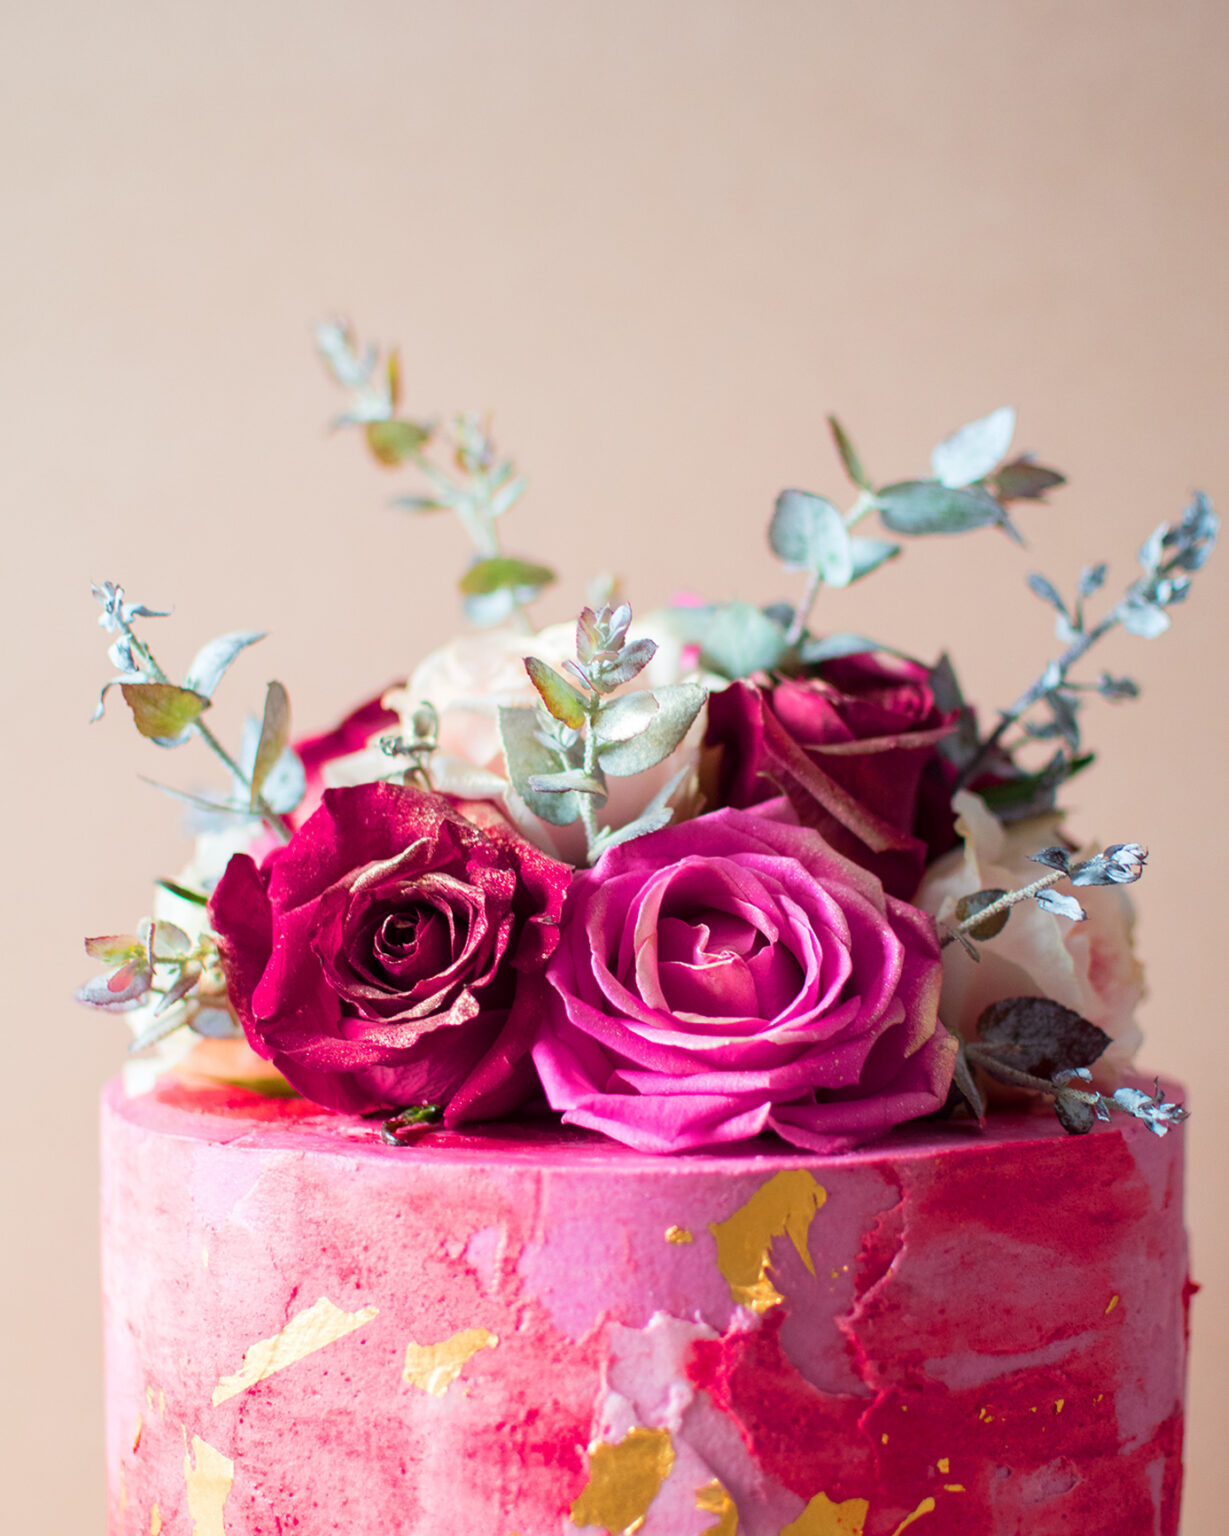 Close up of a pink cake with gold flakes and vintage flowers